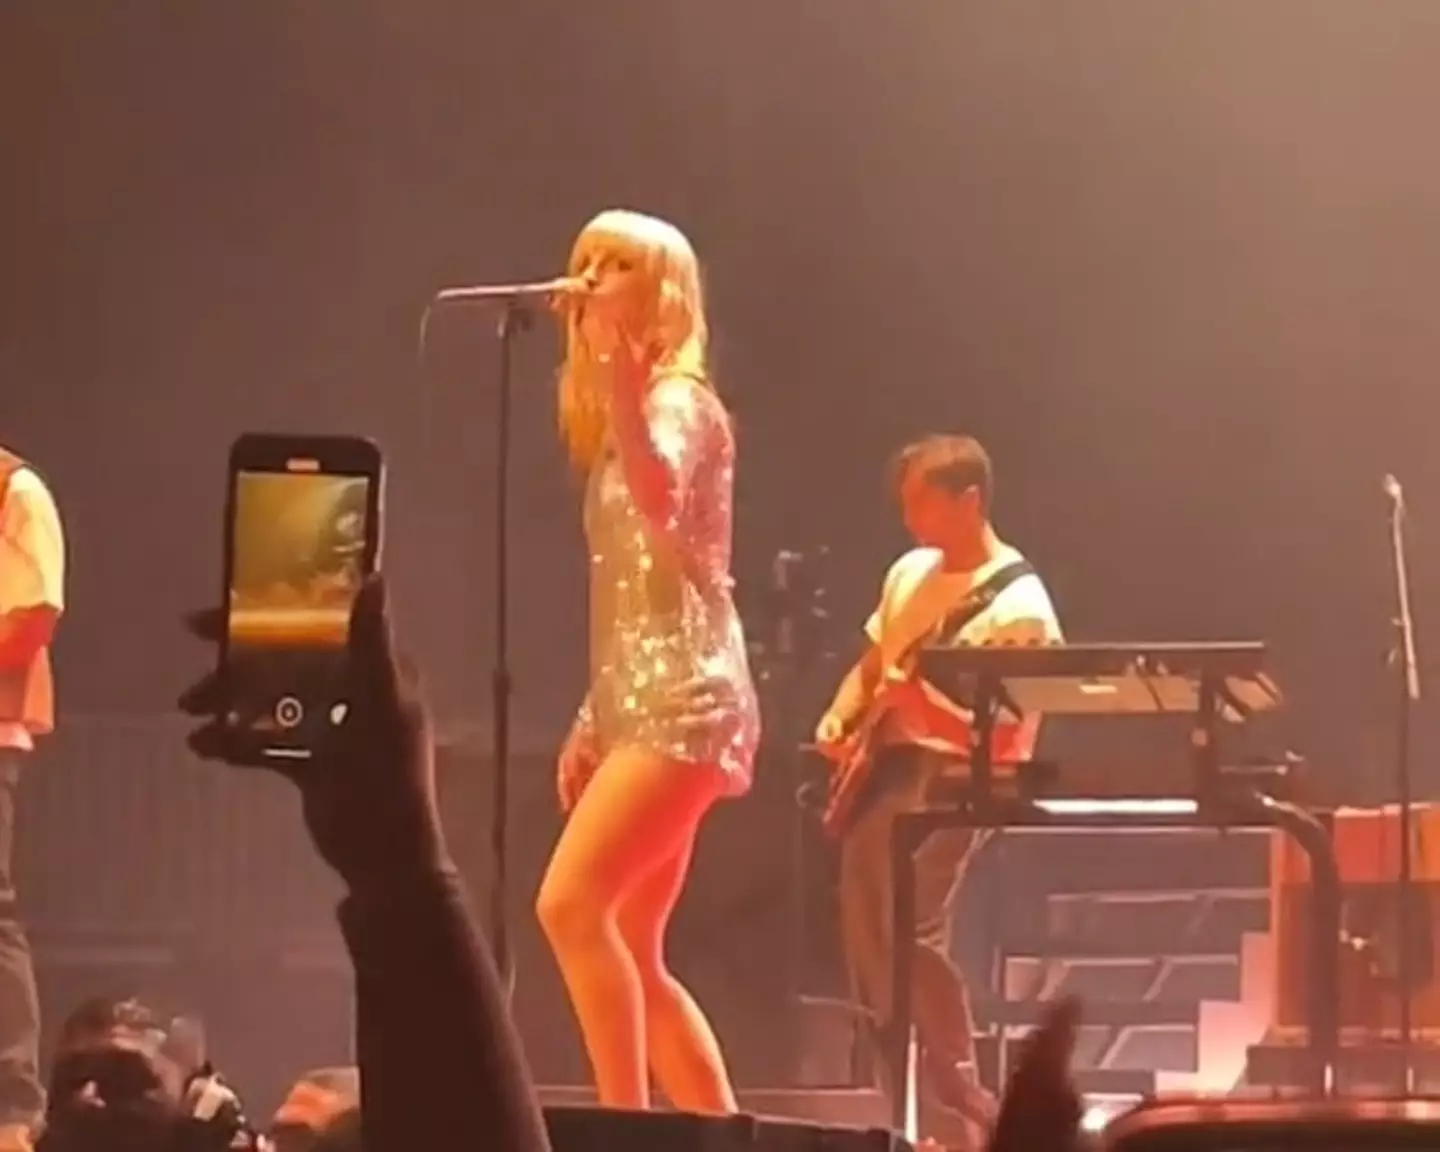 Hayley Williams was performing at Madison Square Garden when two fans were kicked out of her concert.